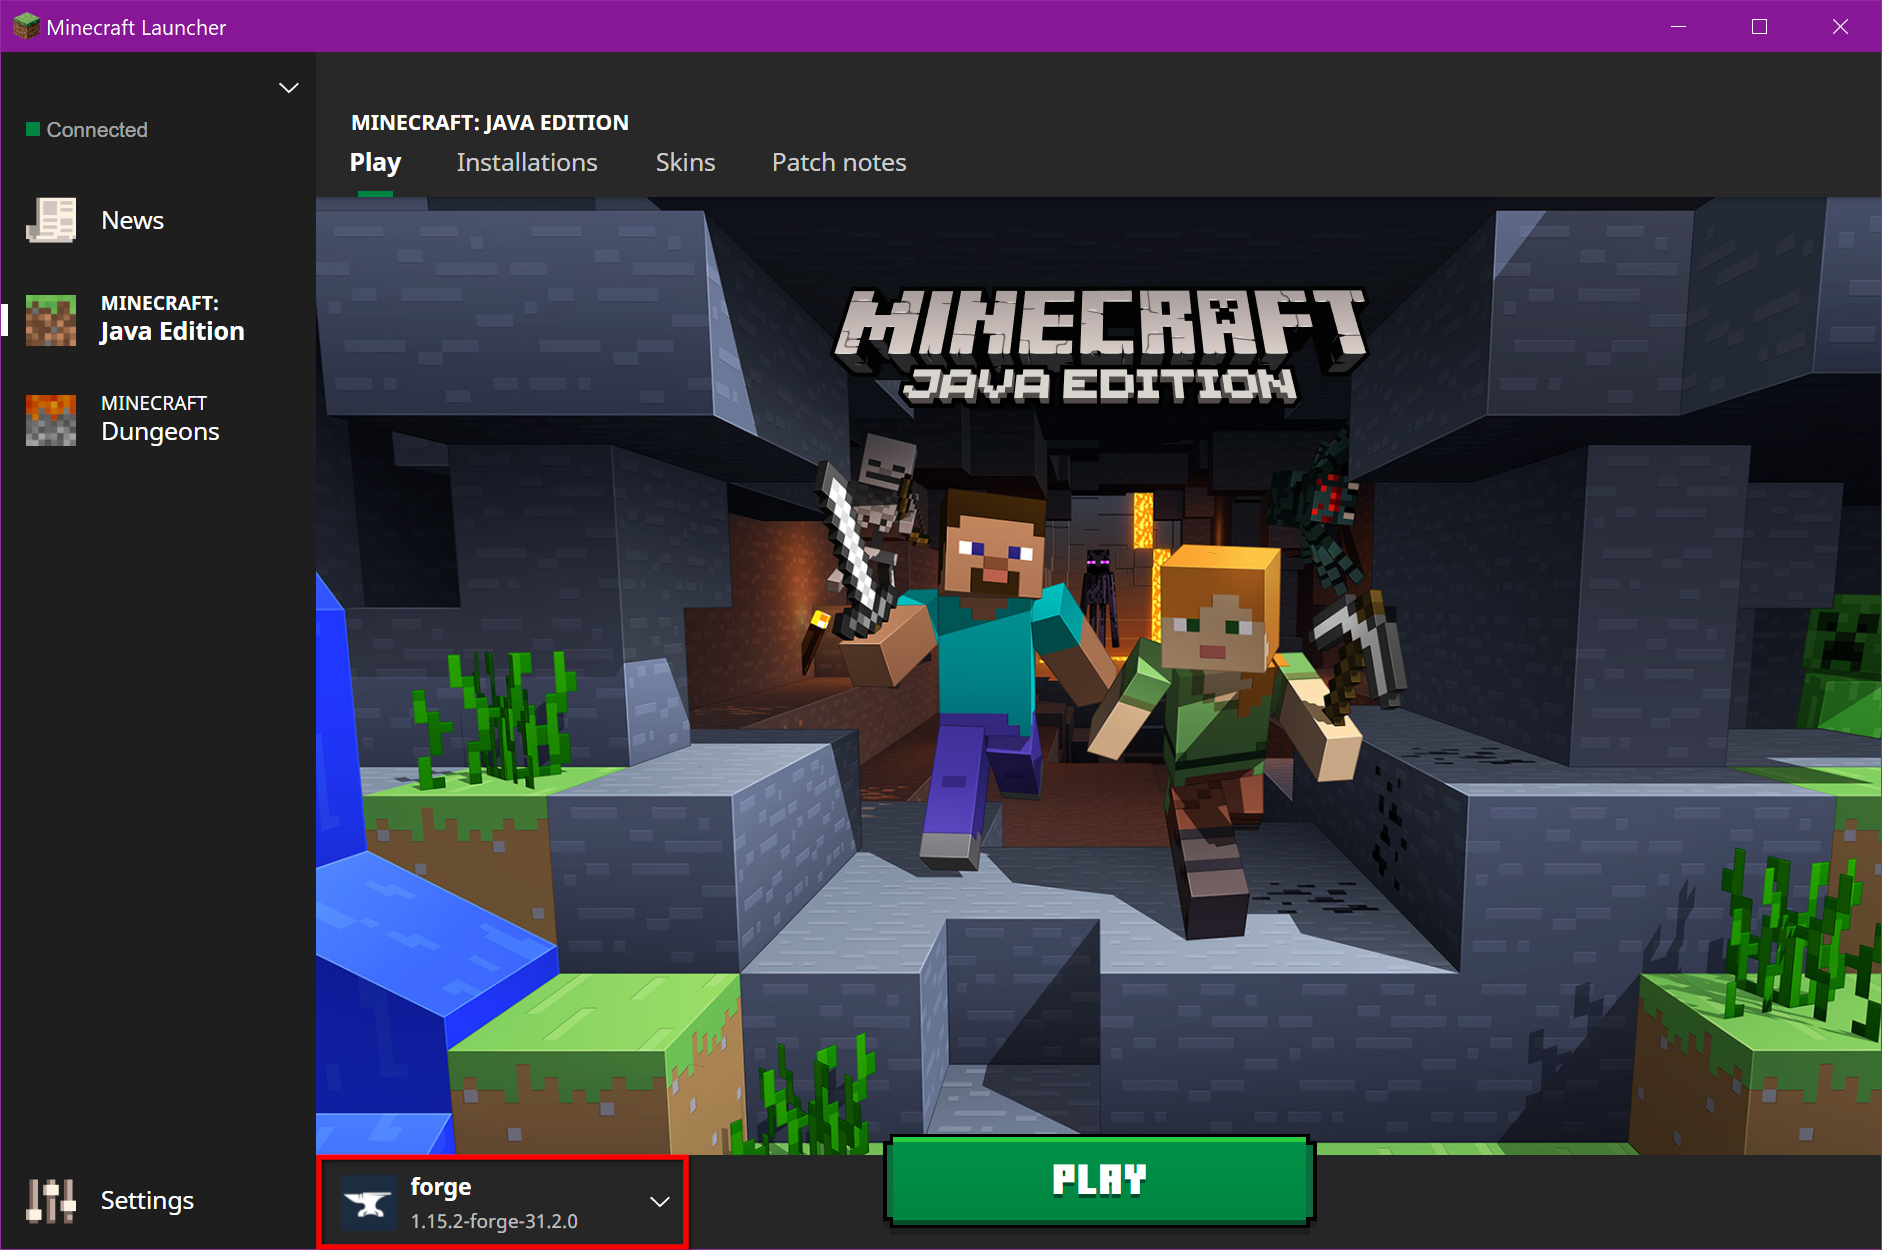 How To Download and Install The New Minecraft Launcher - (Quick & Easy) 